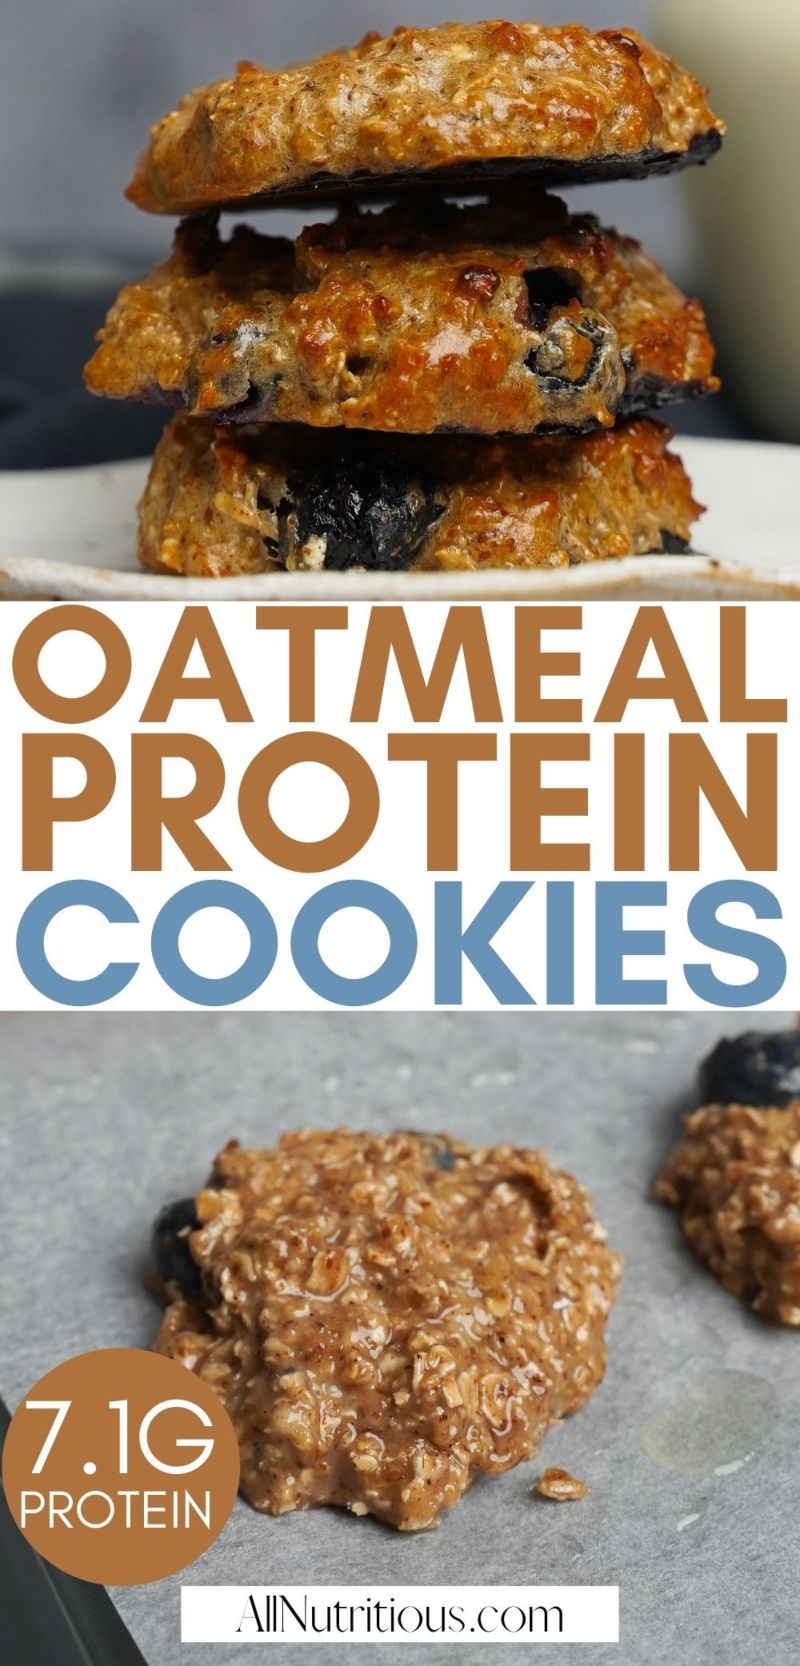 oatmeal protein cookies